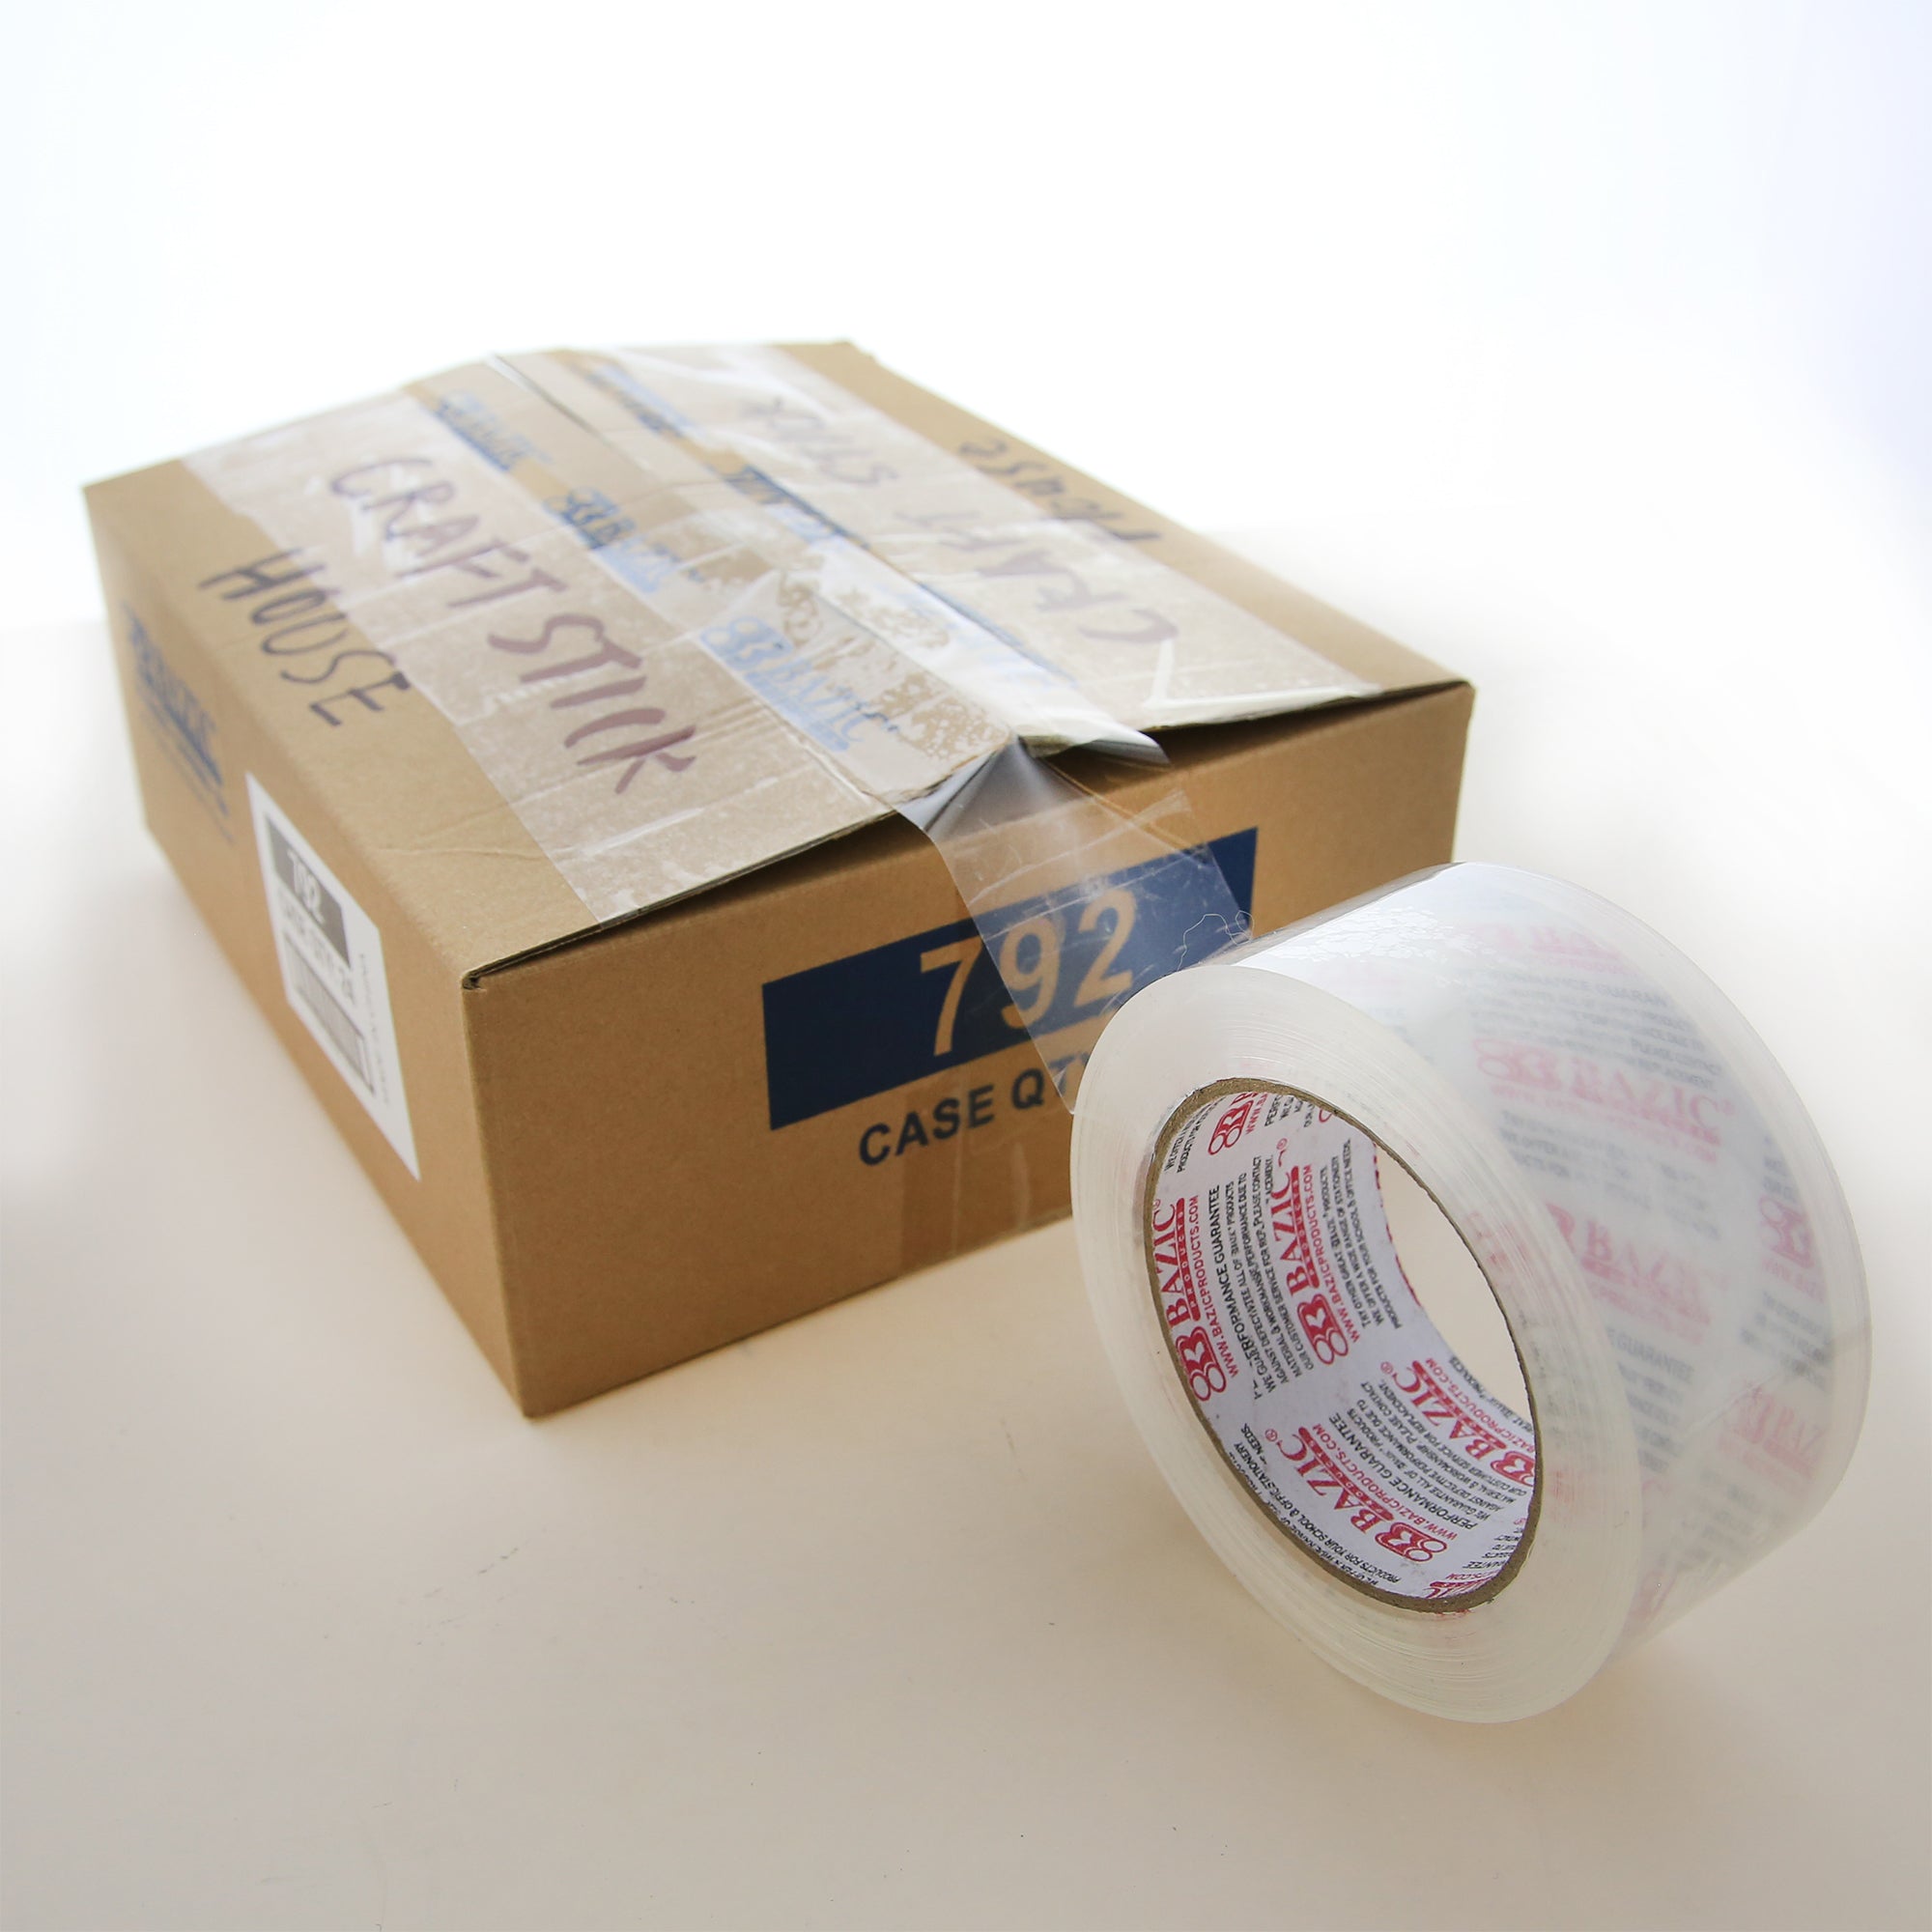 Bazic Heavy Duty Industrial Clear Packing Tape 1.88 x 109.3 Yards